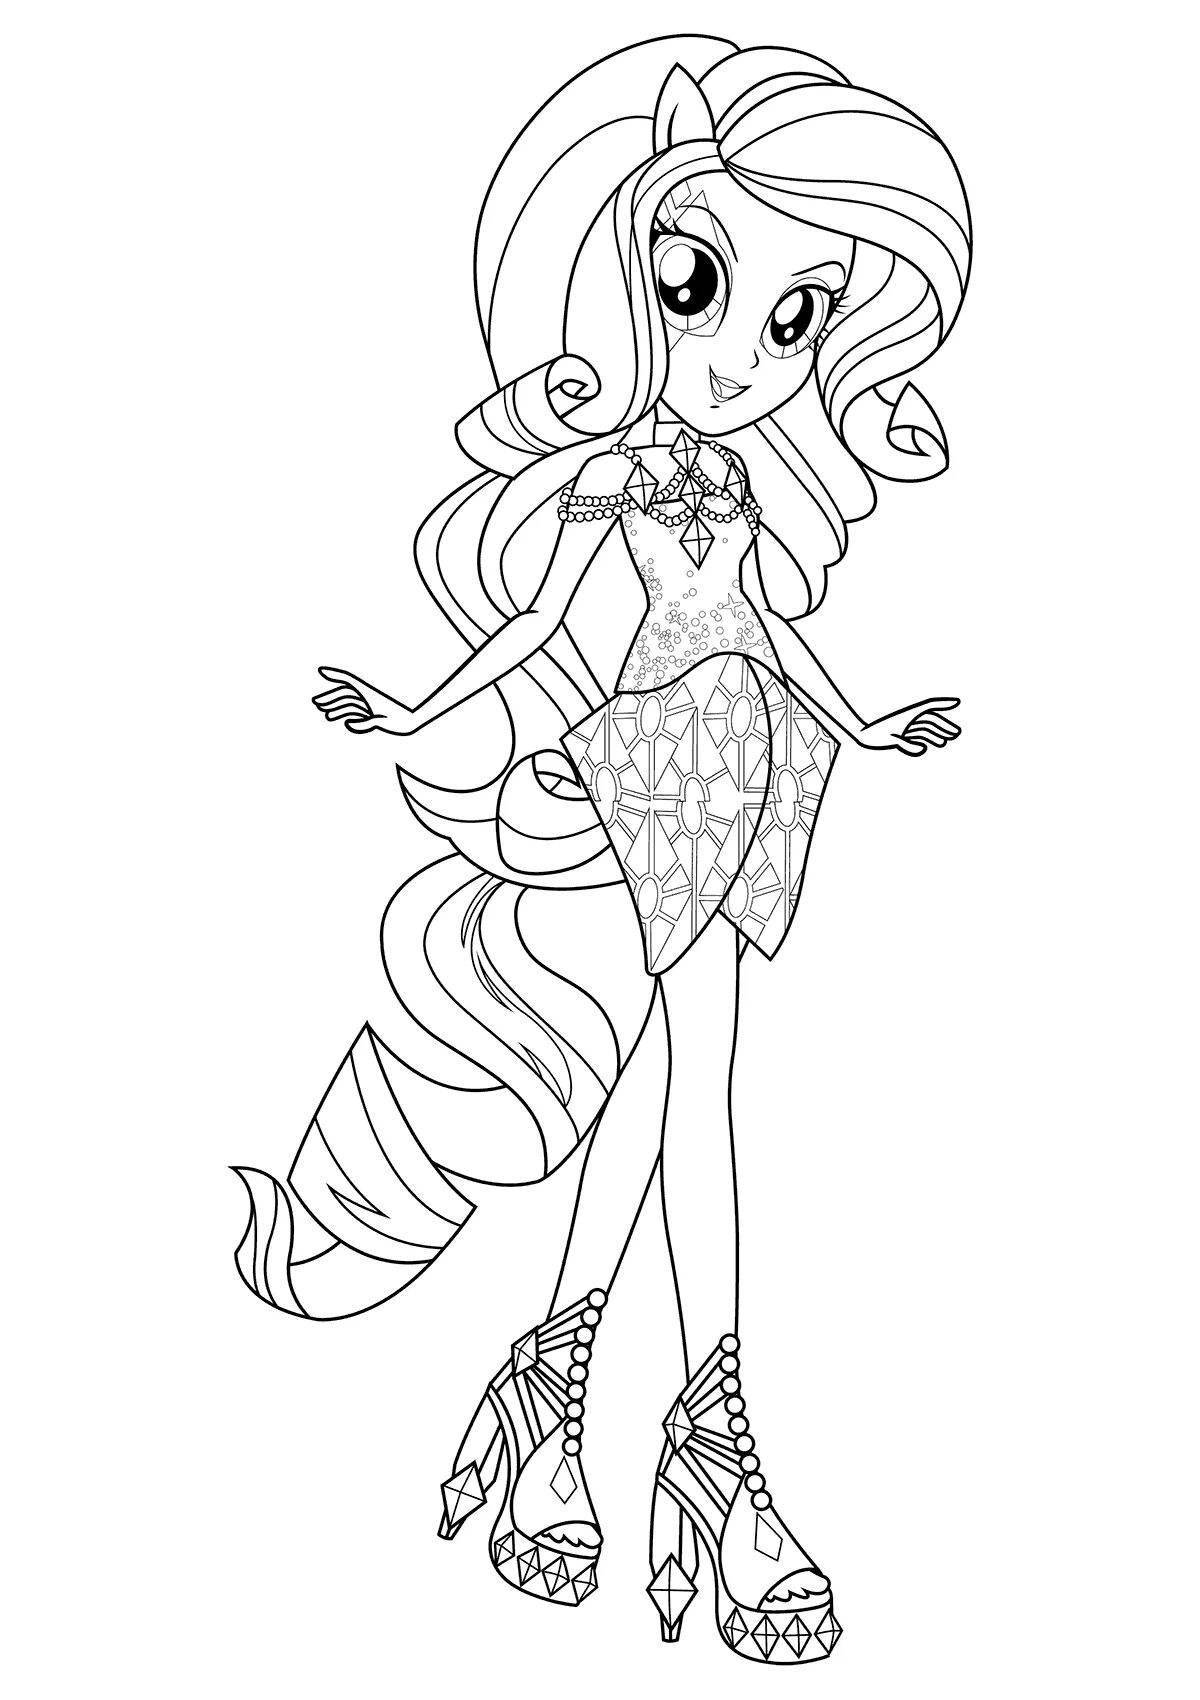 Animated equestria girls coloring pages